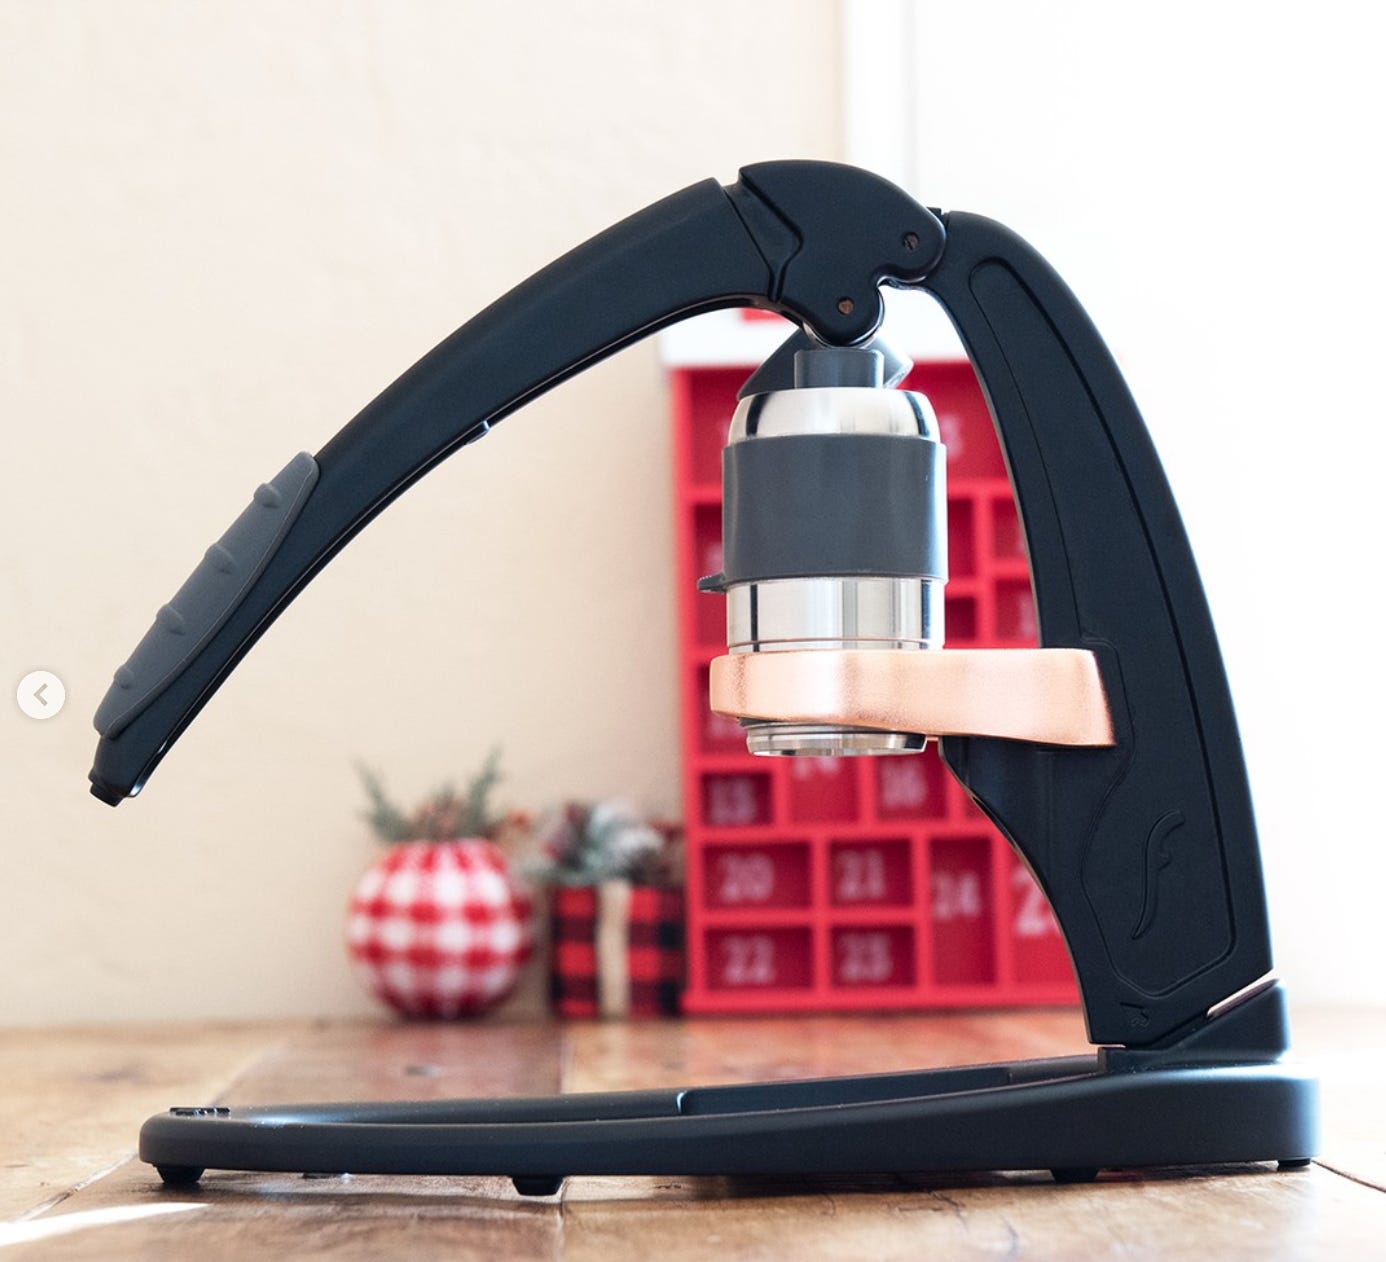 Side view of a modern style lever handle manual espresso machine in black finish with a bronze portafilter basket.